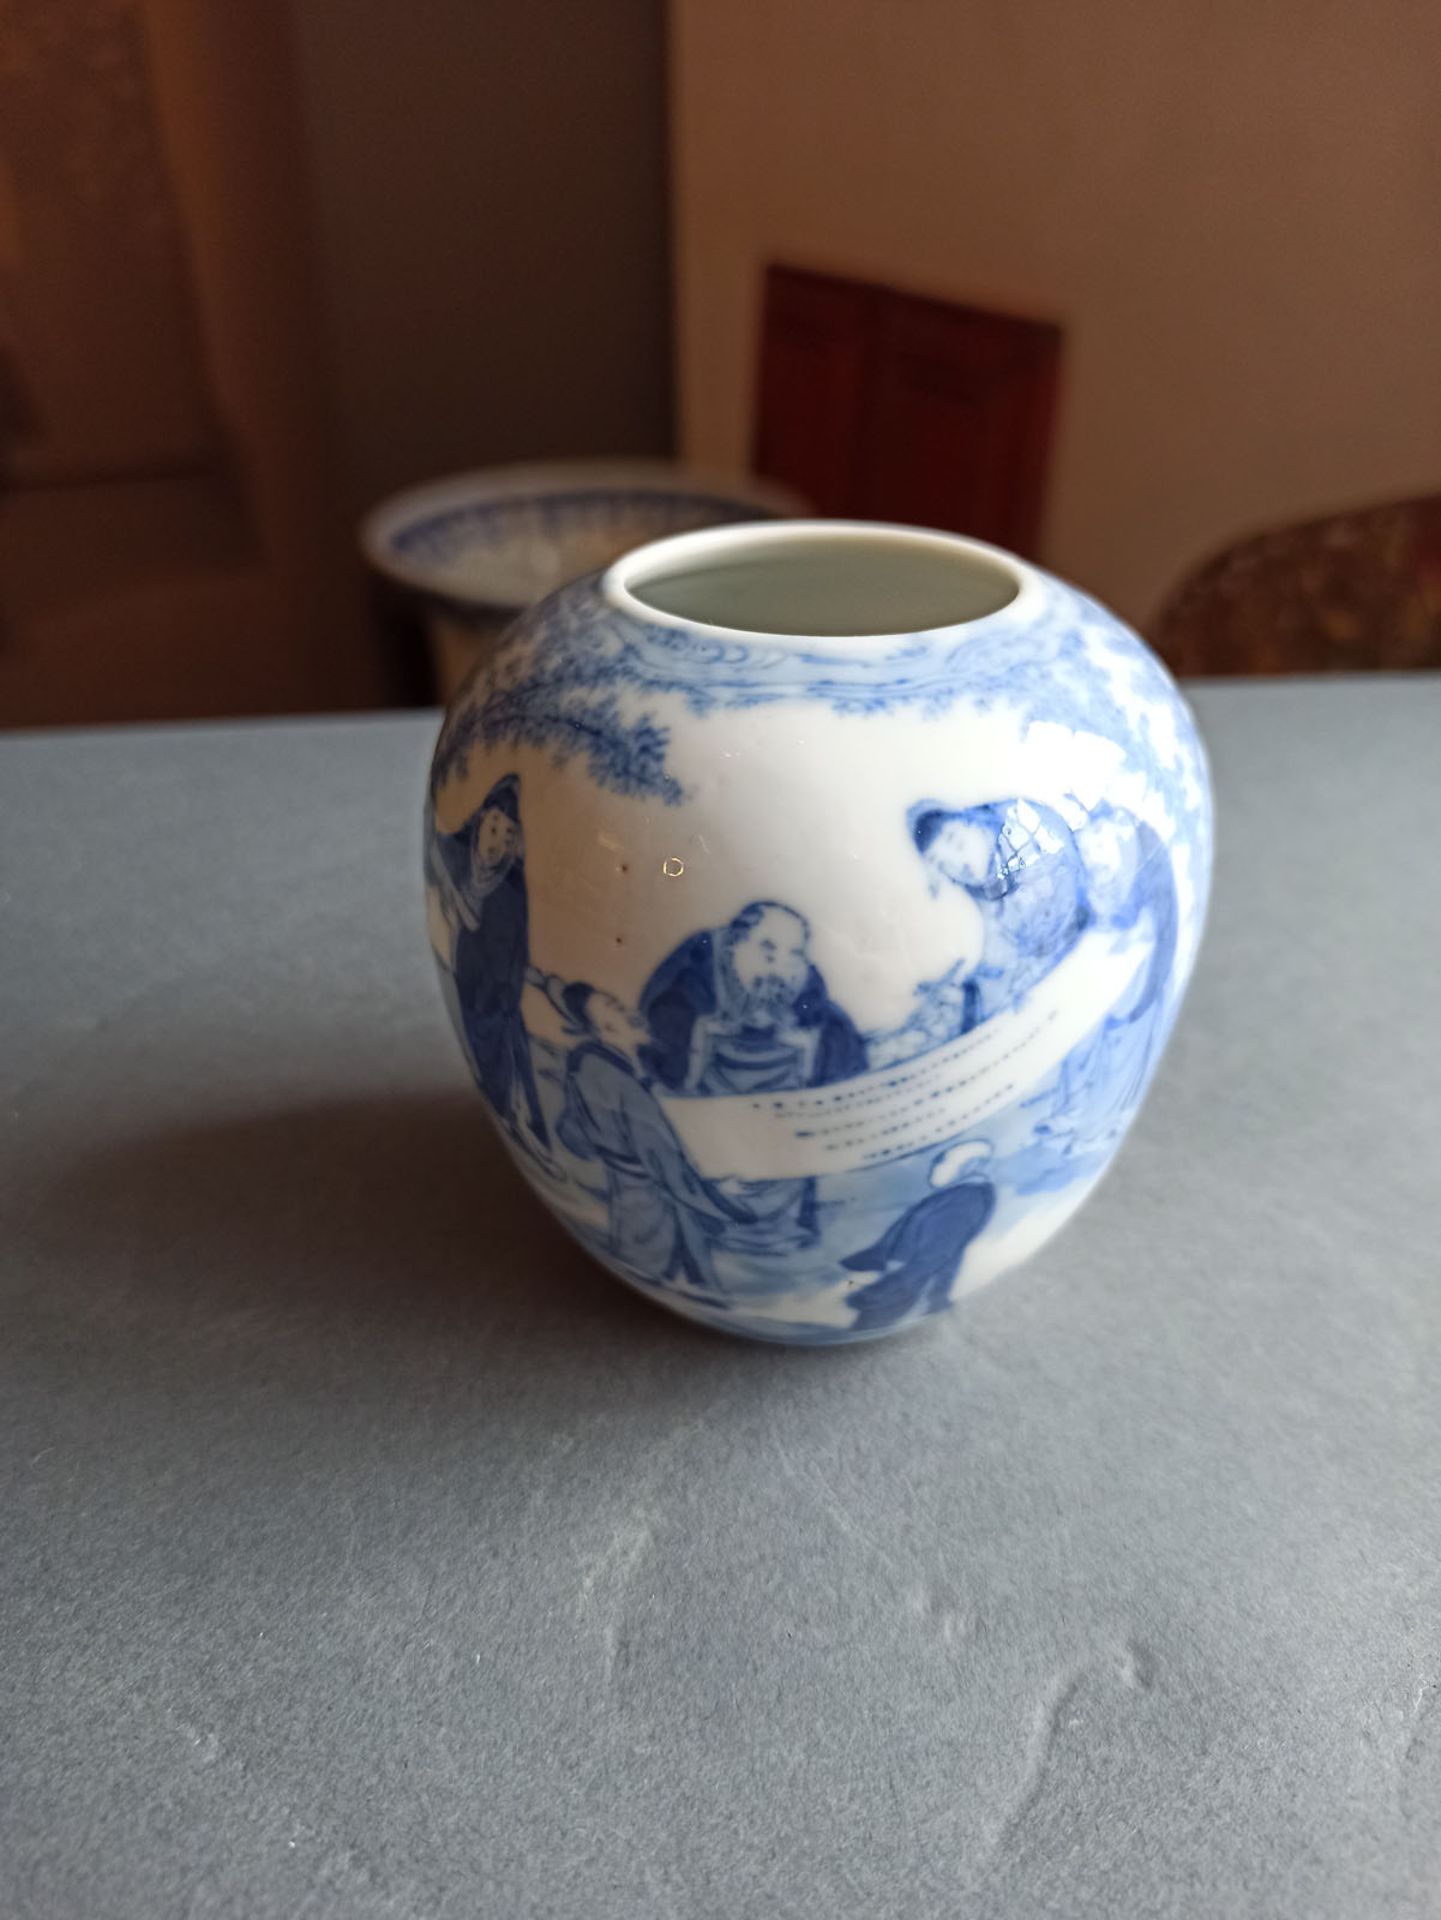 A GLOBULAR BLUE AND WHITE PORCELAIN WITH SCHIOLARS LOOKING AT A CALLIGRAPHY - Image 2 of 7